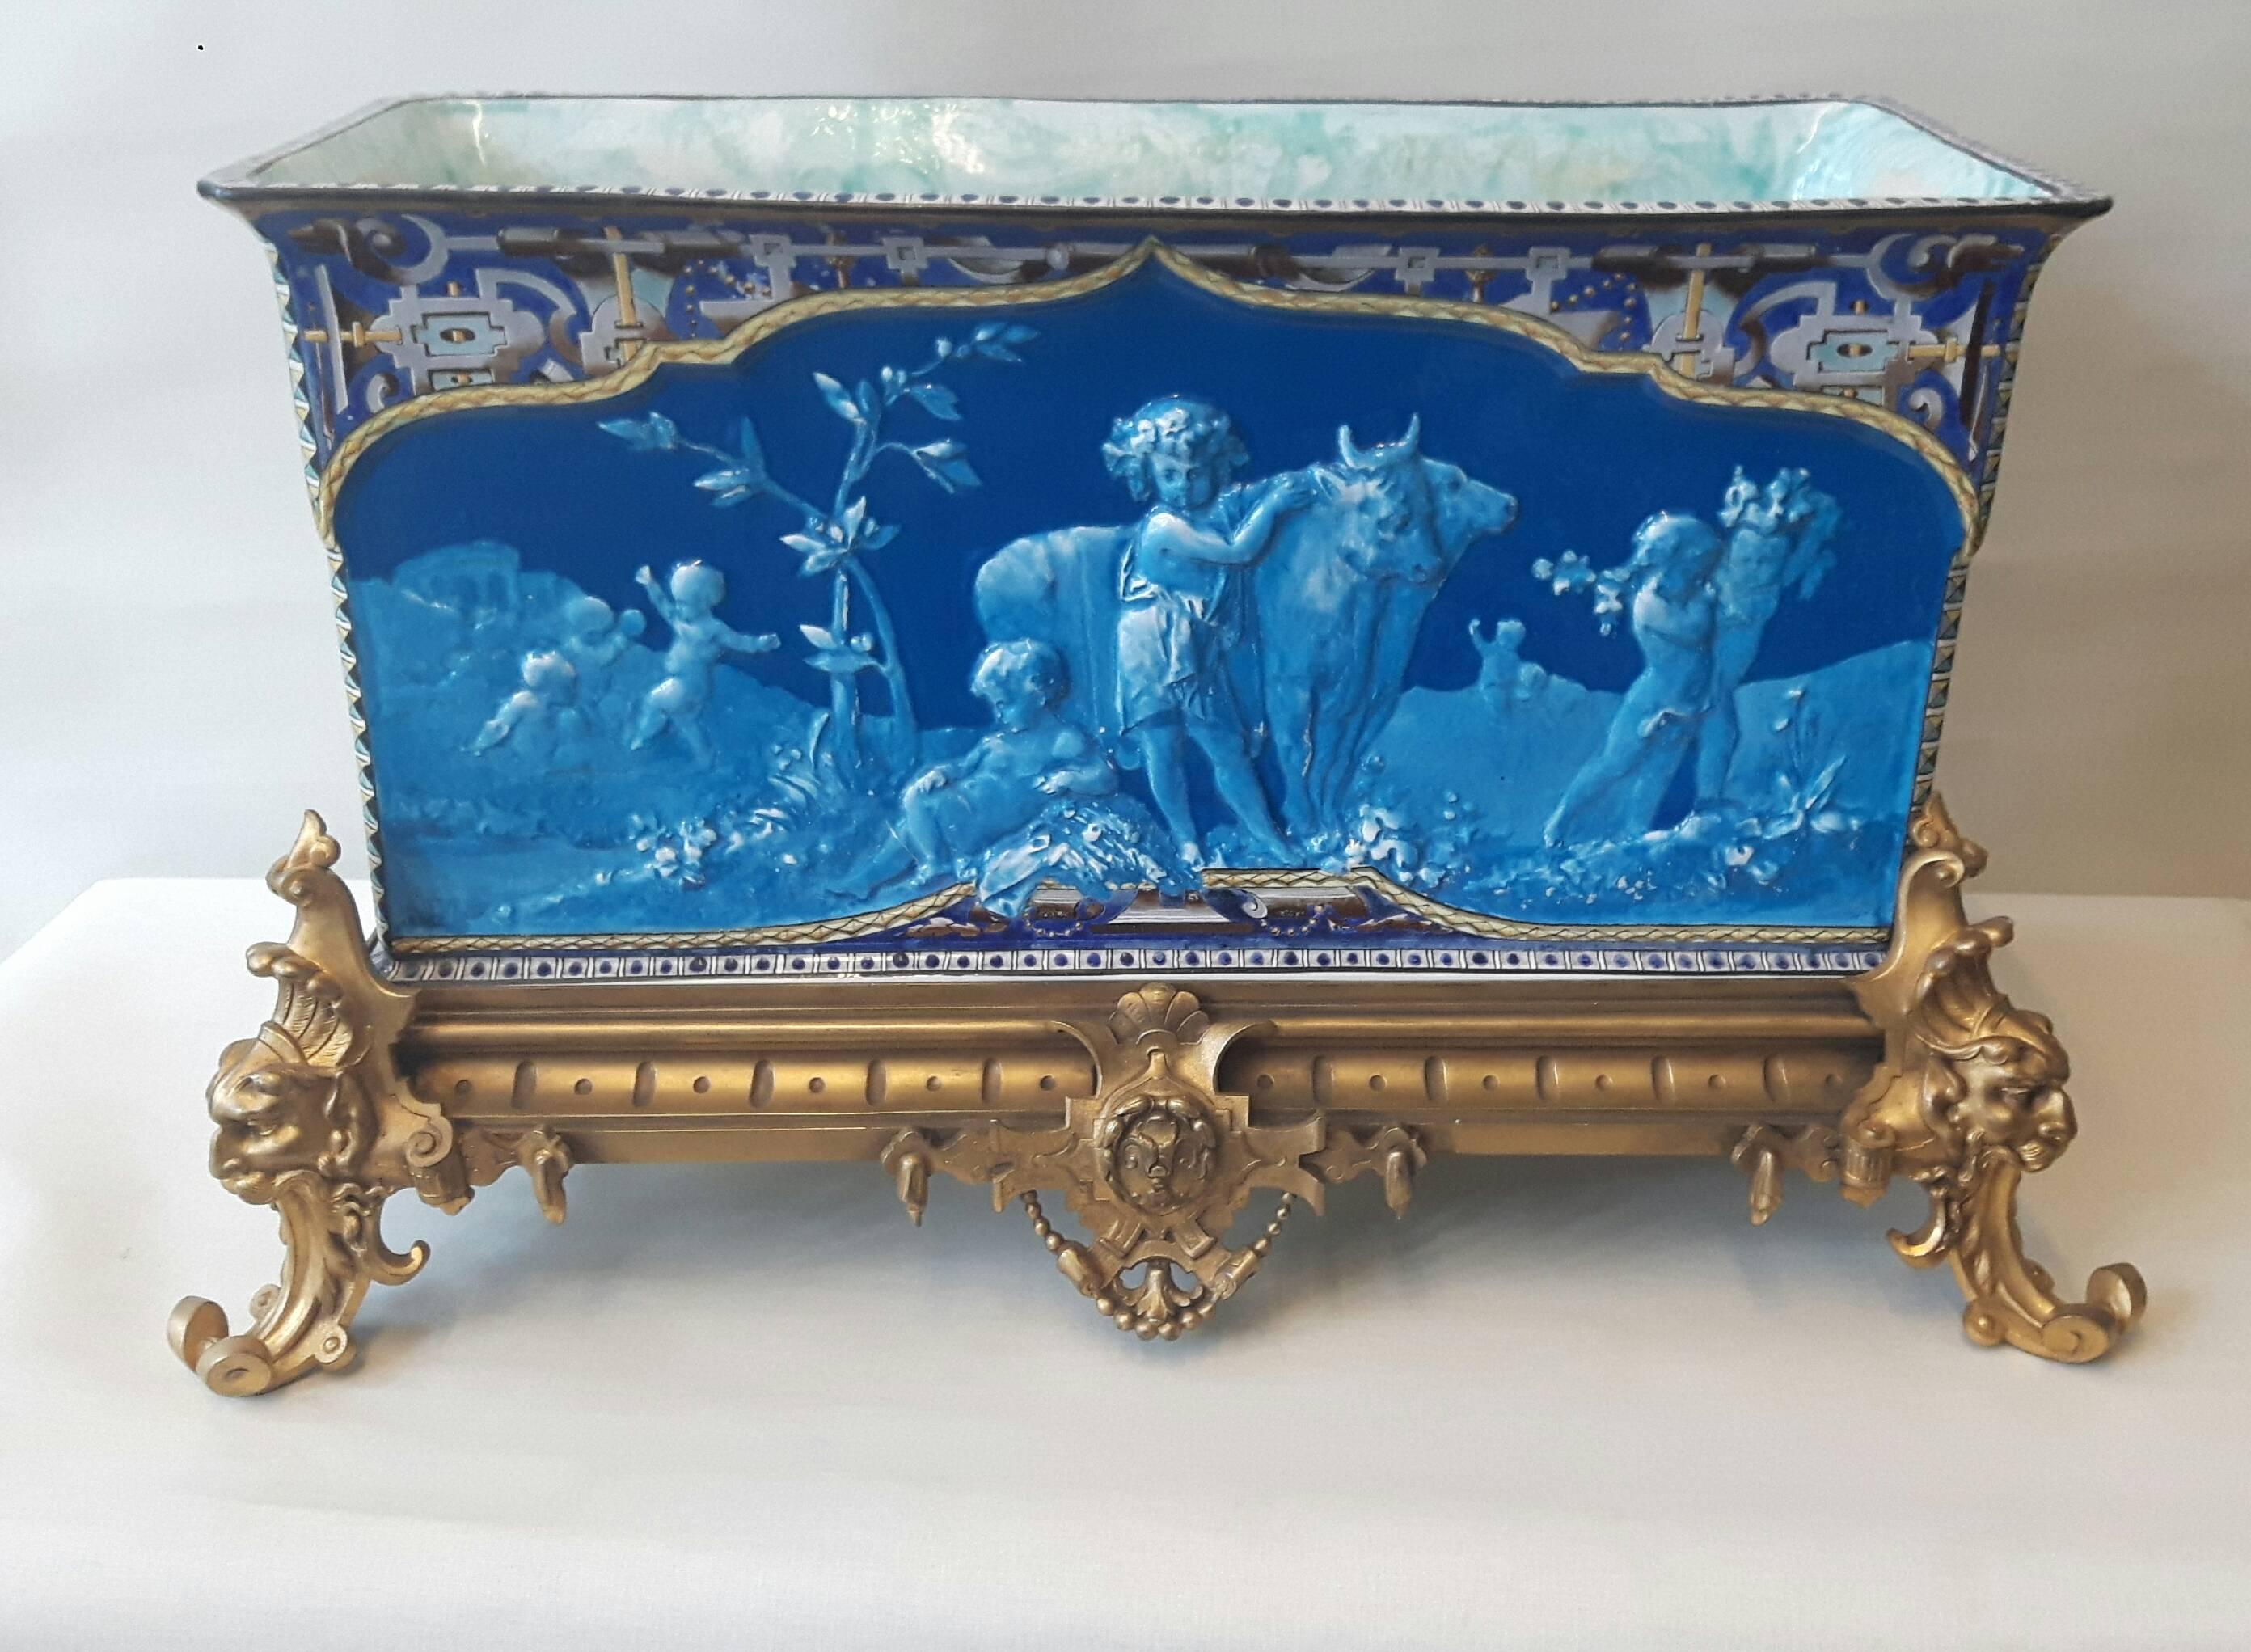 A very large ornate French jardinière Napoleon III period, painted in the 18th century style'' en grisalle'' with putti or cherubs re -enacting mythological scenes. The top part of the jardinière is hand-painted to resemble cloissone.
The base is